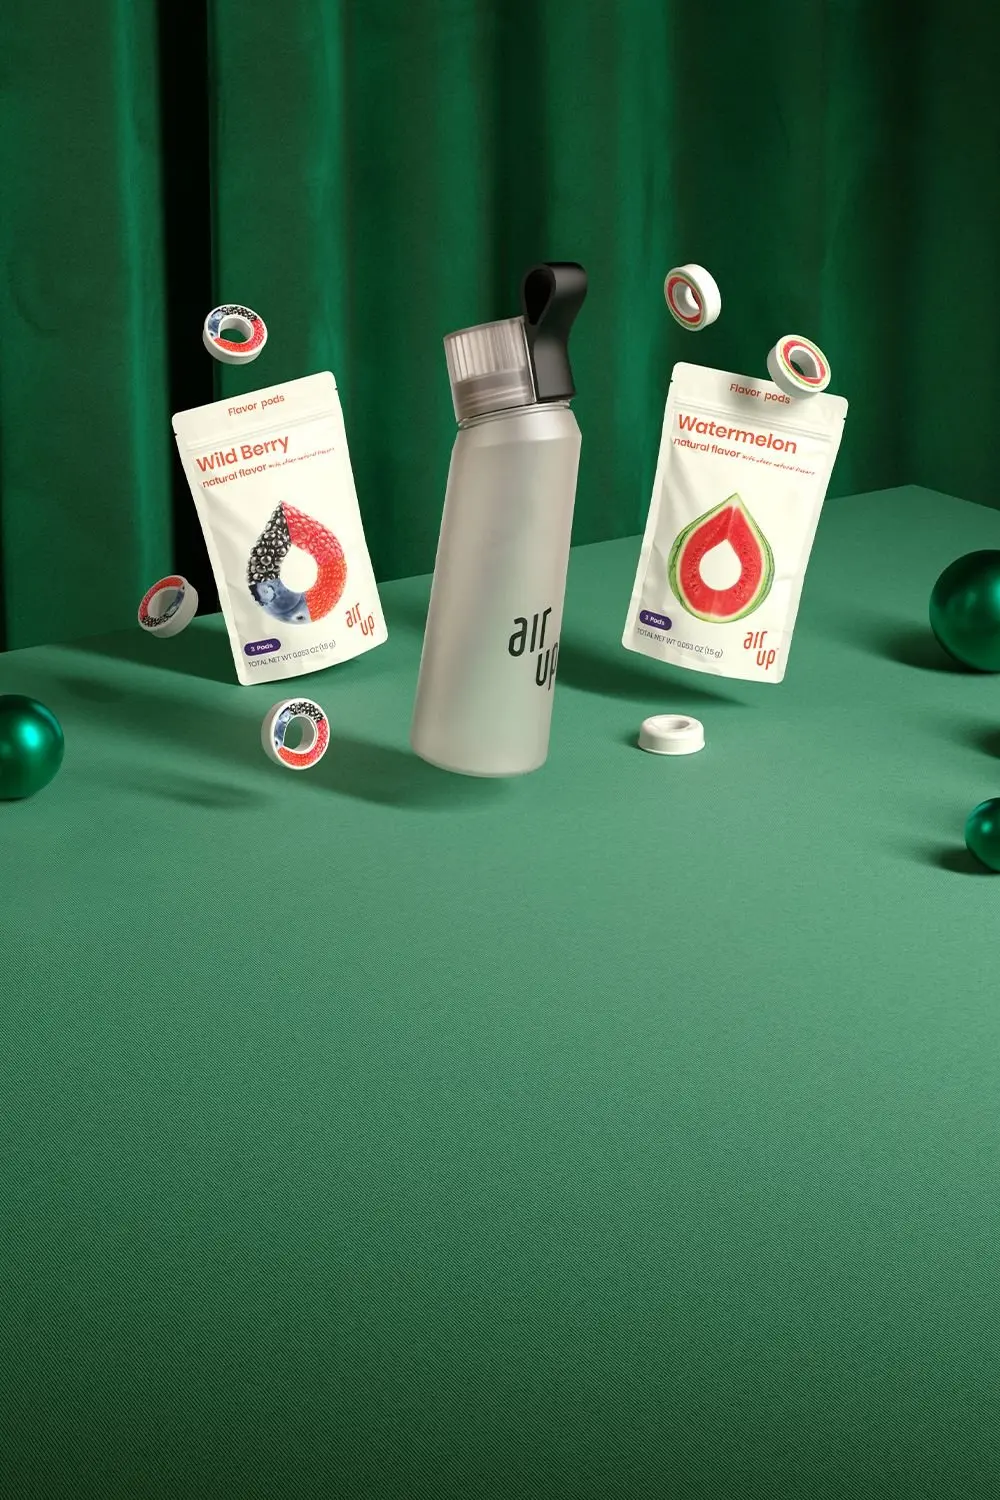 A Pearl White air up bottle sits in a holiday scene with wild berry and watermelon pods